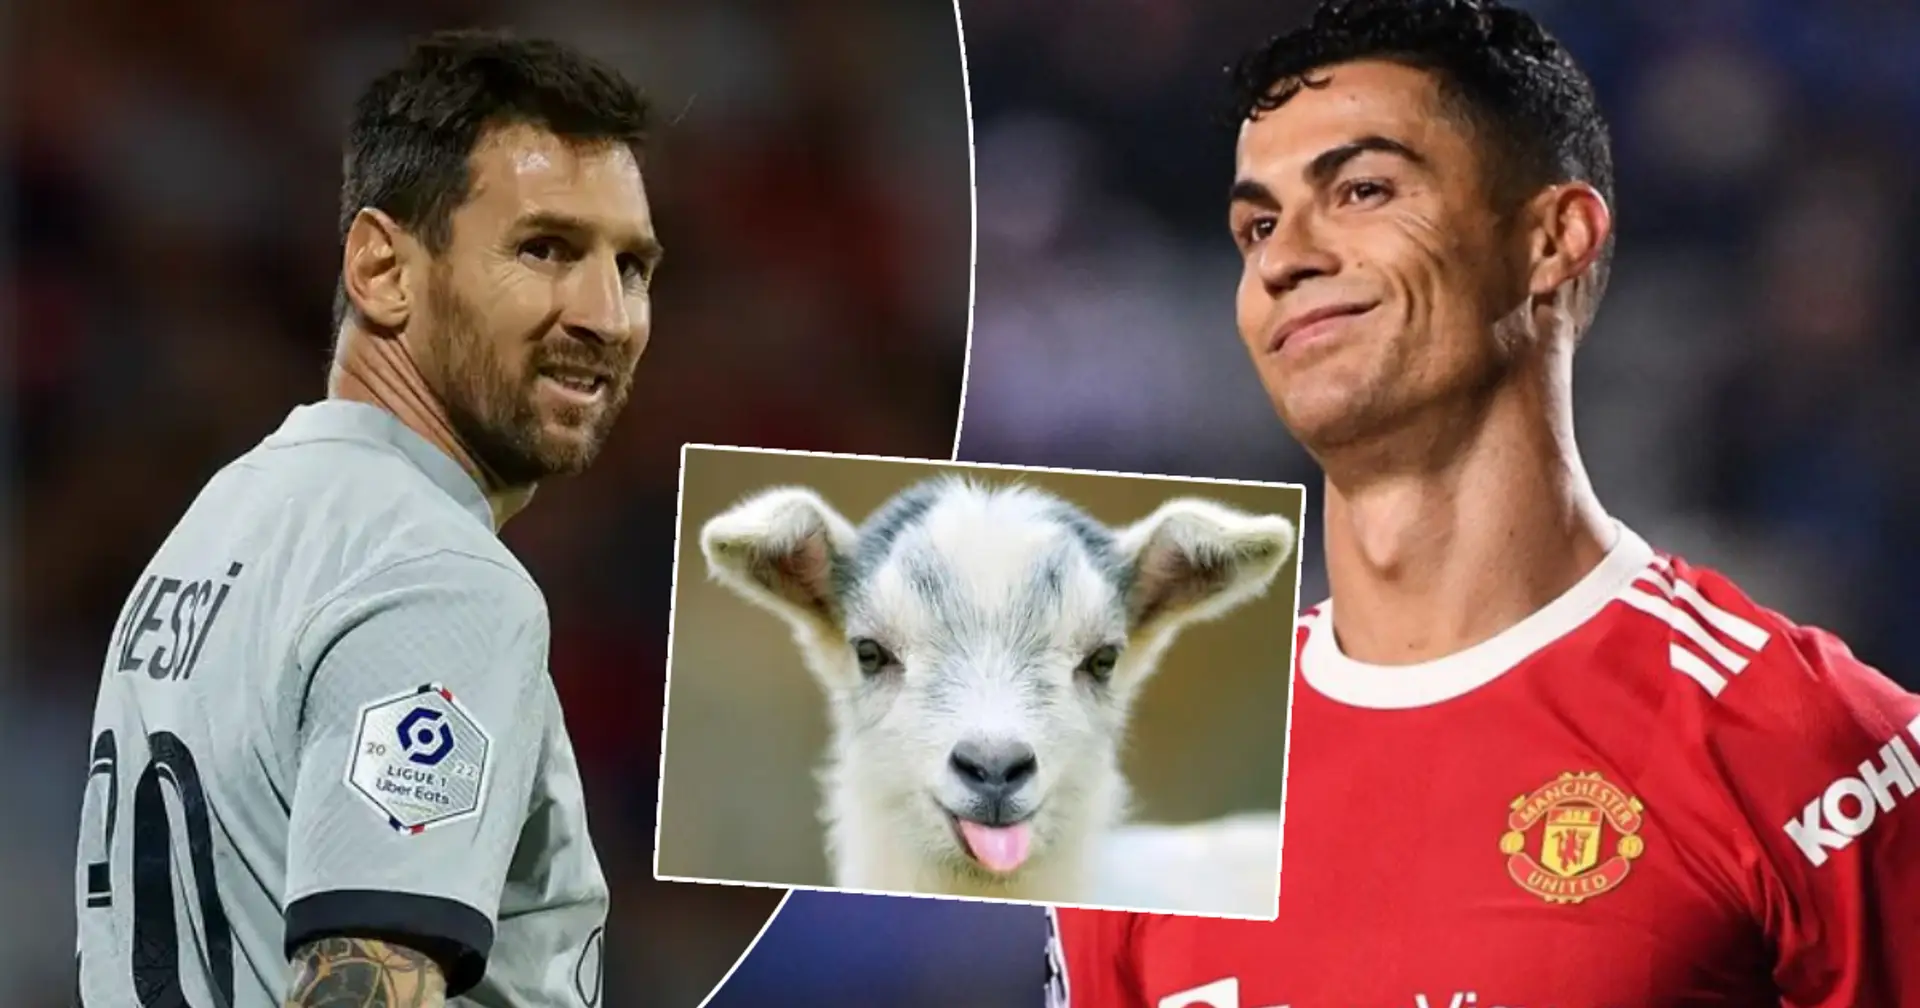 Who Is The Football Goat In The World? Image Credits:- Tribuna.